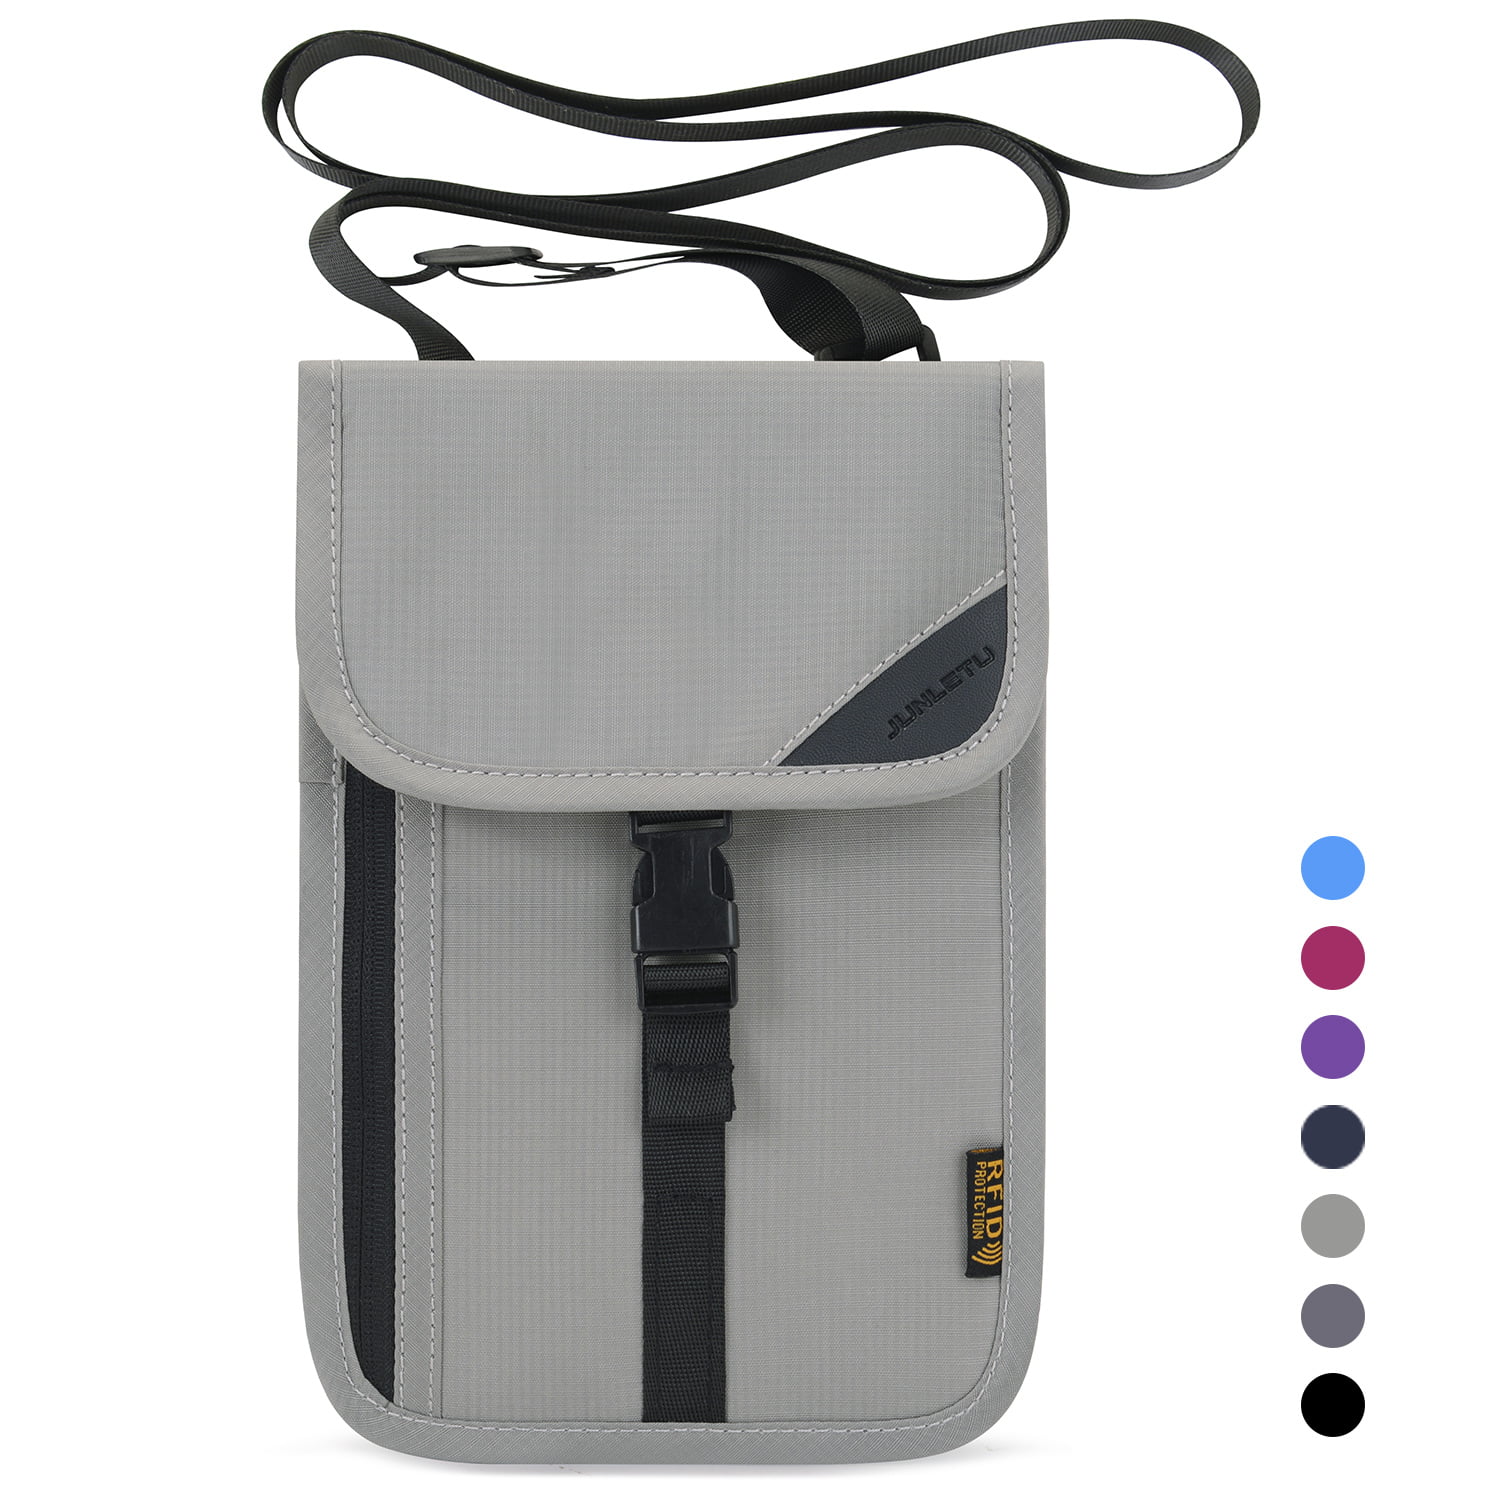 Wallet with neck strap Travel neck pouch Leather neck wallet Travel neck wallet Neck pouch Neck wallet Neck strap wallet Neck purse